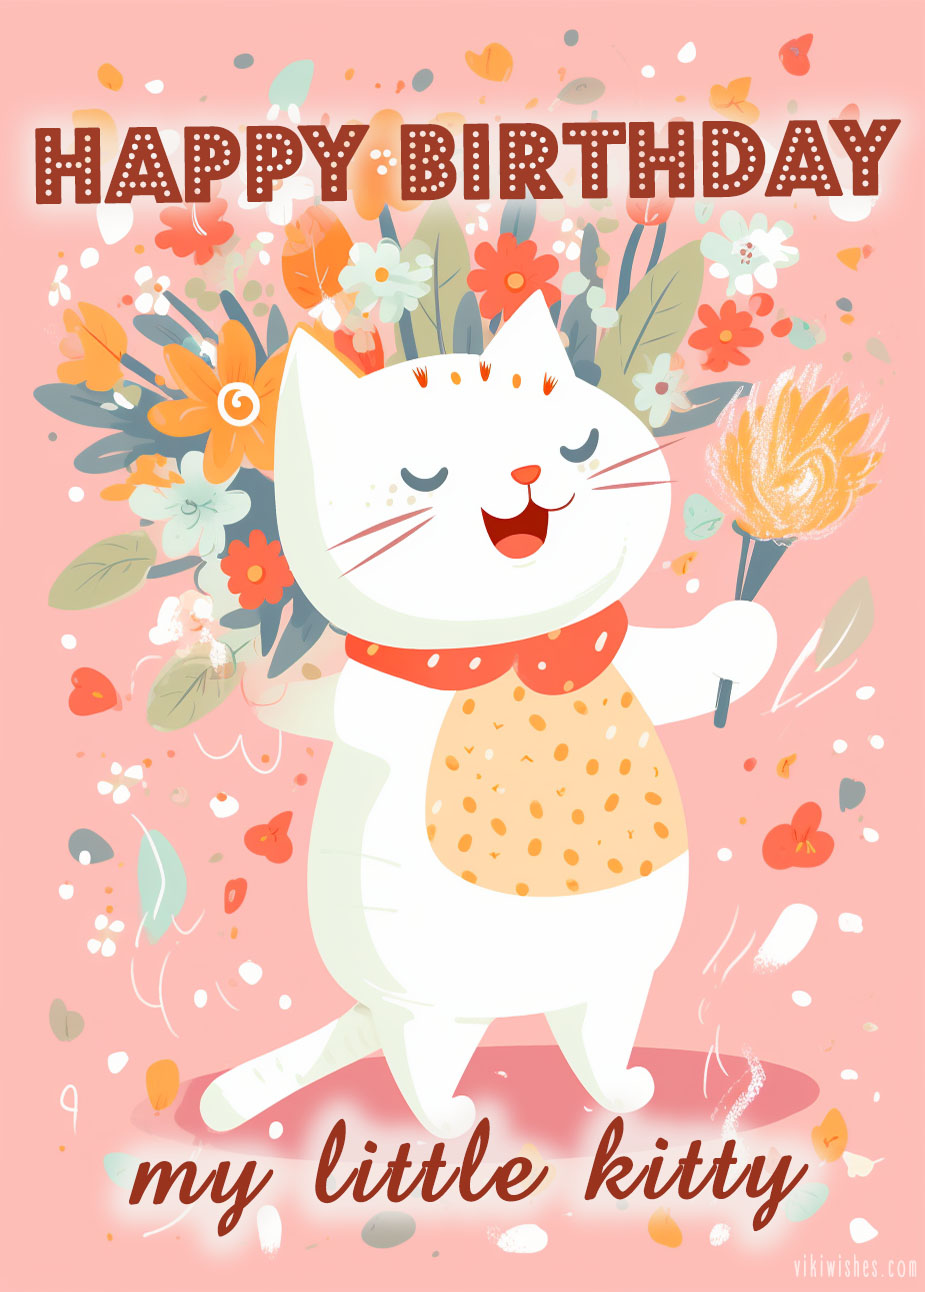 Funny kitty wishes your wife a happy birthday